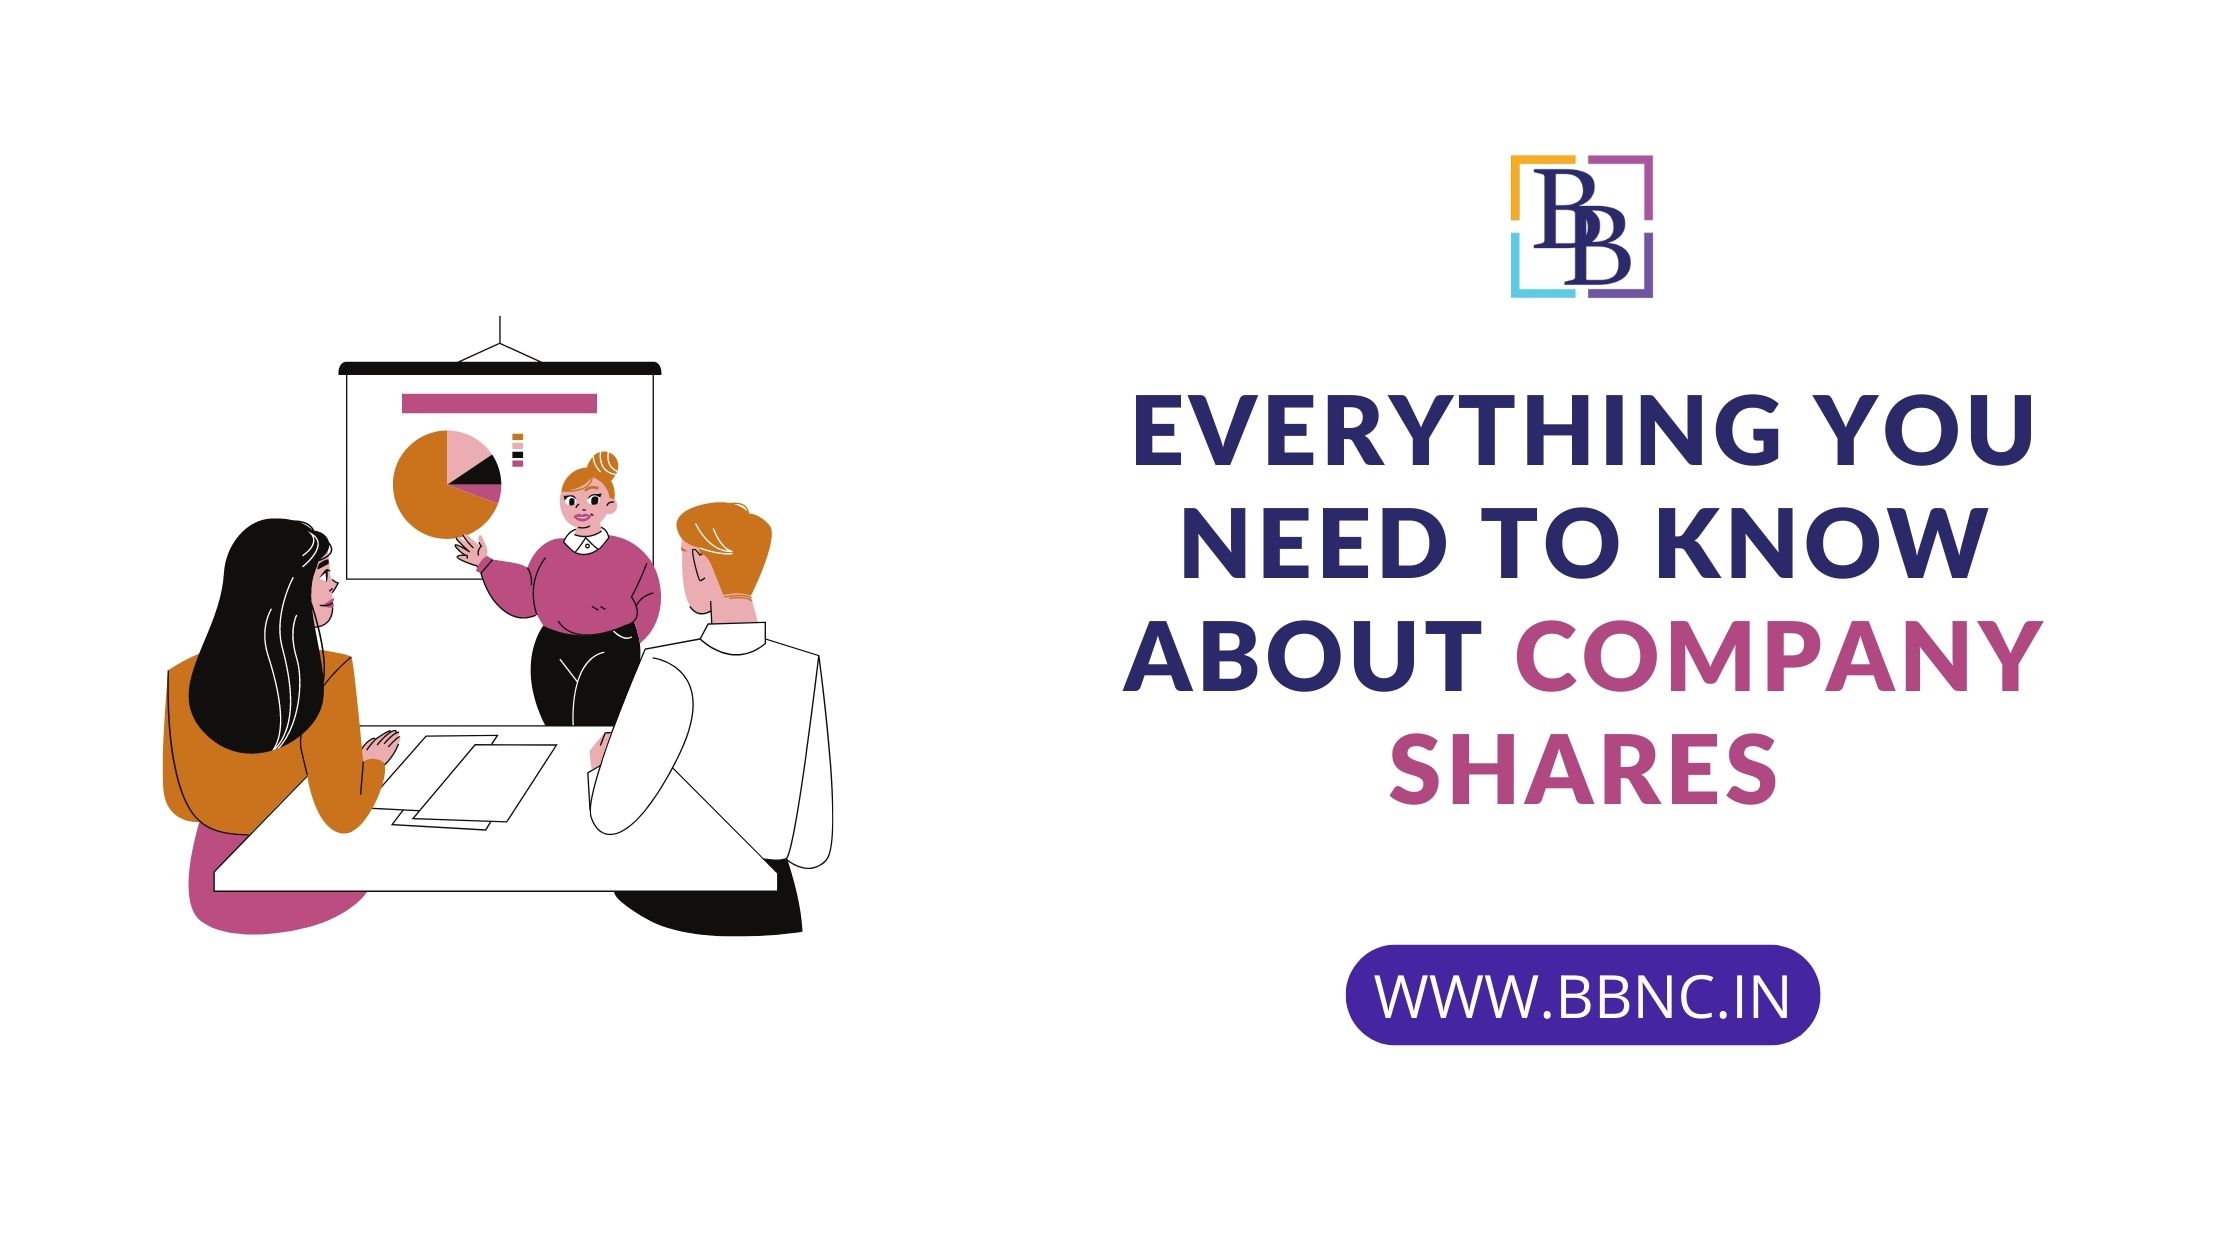 Here is everything you should know about company shares